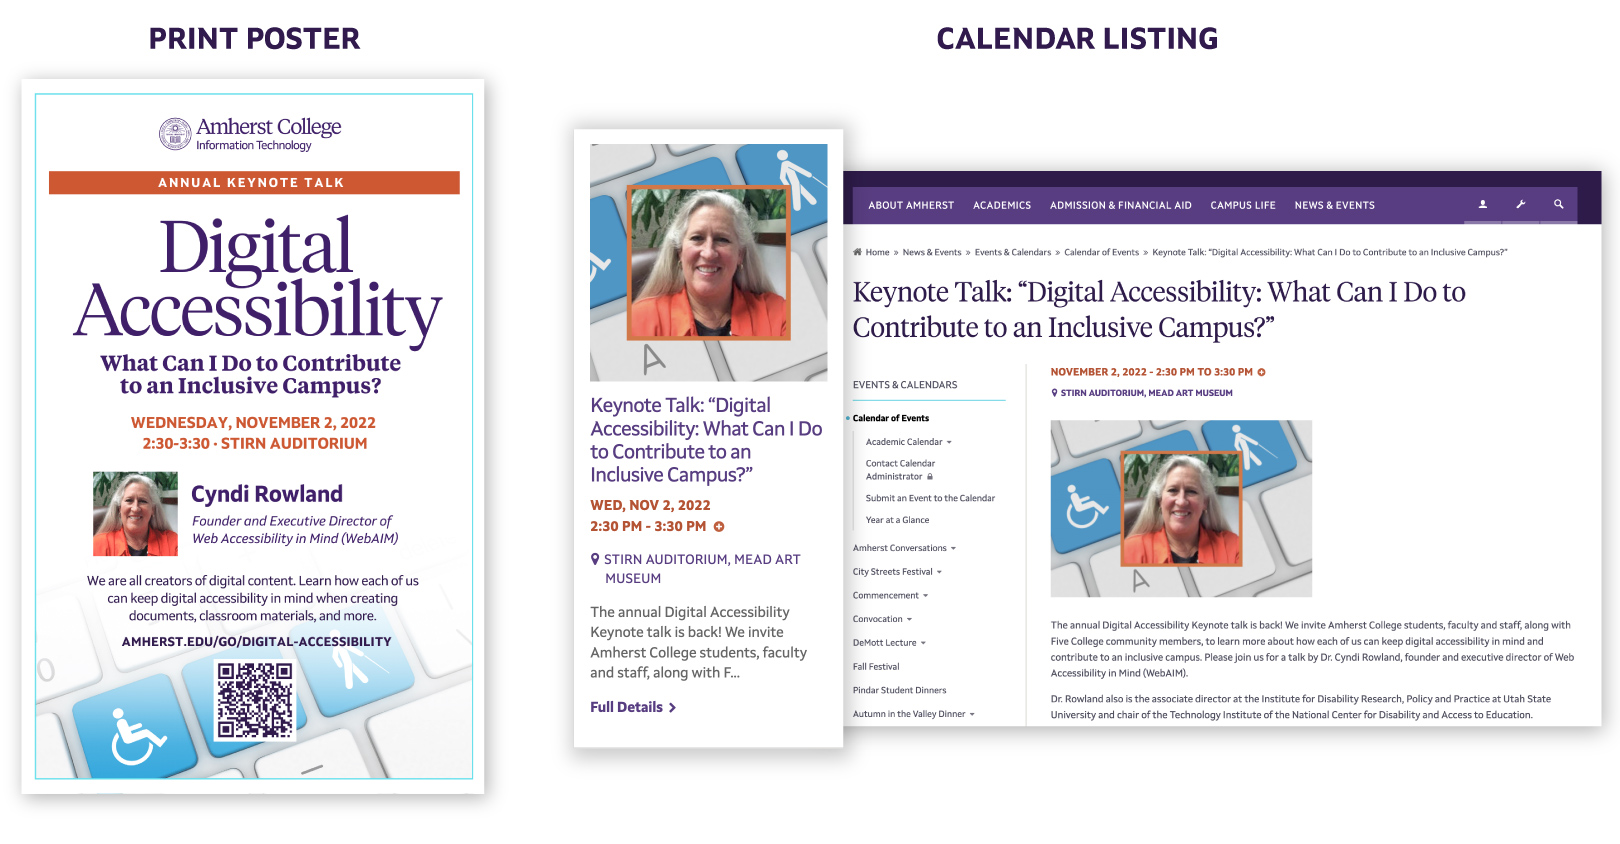 screenshot of a poster and calendar posts promoting a talk on Digital Accessibility